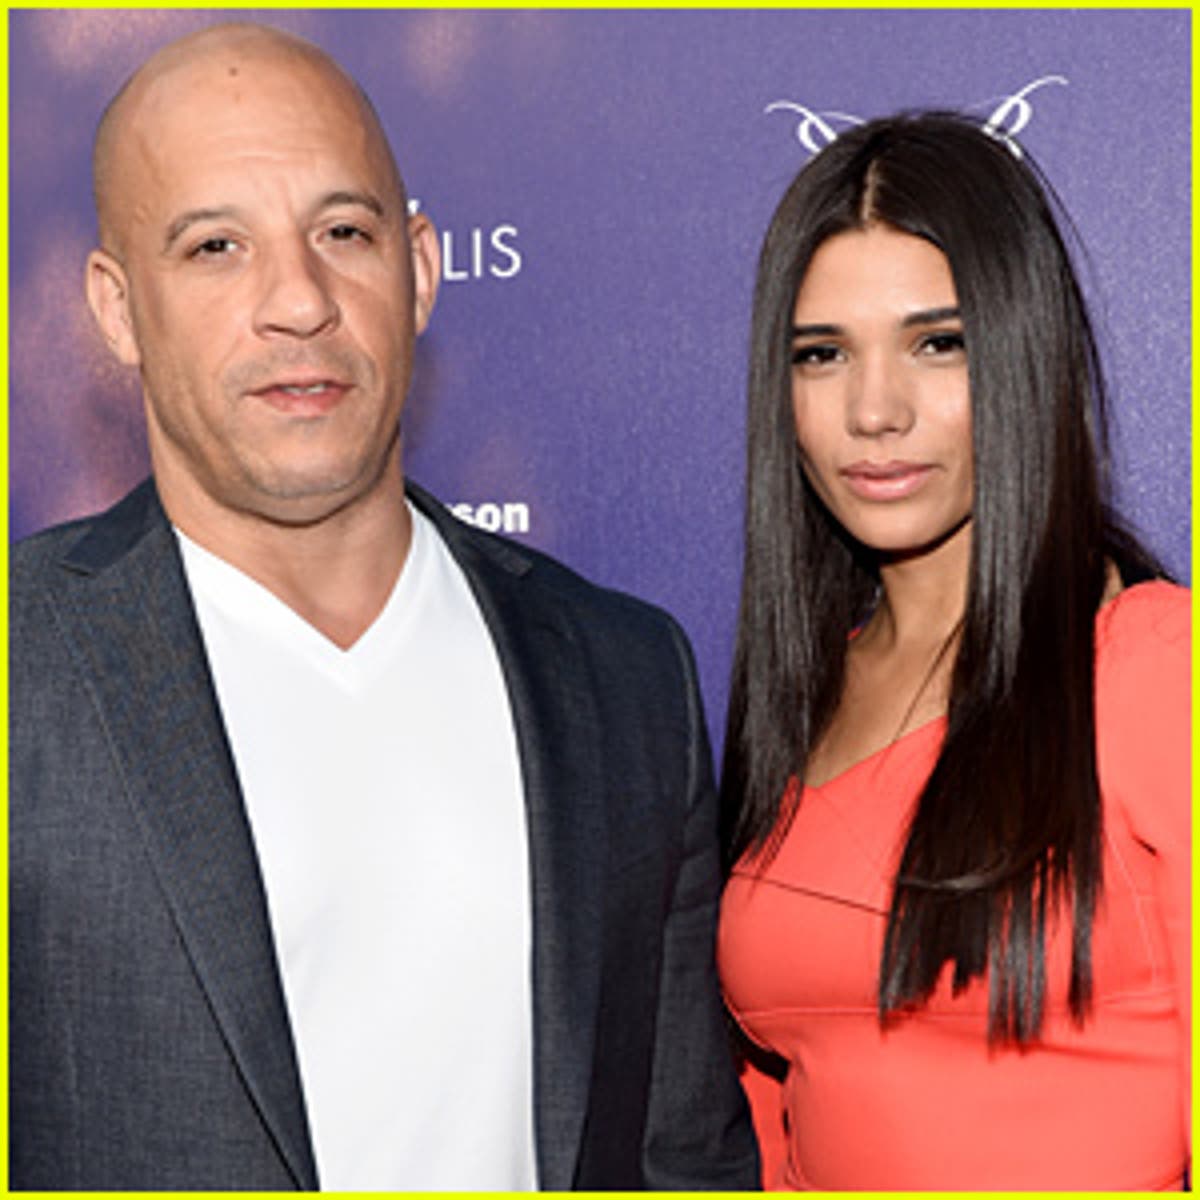 Dominic Toretto Sex Videos - Paloma Jimenez Wiki: 5 Facts To Know About Vin Diesel's Partner